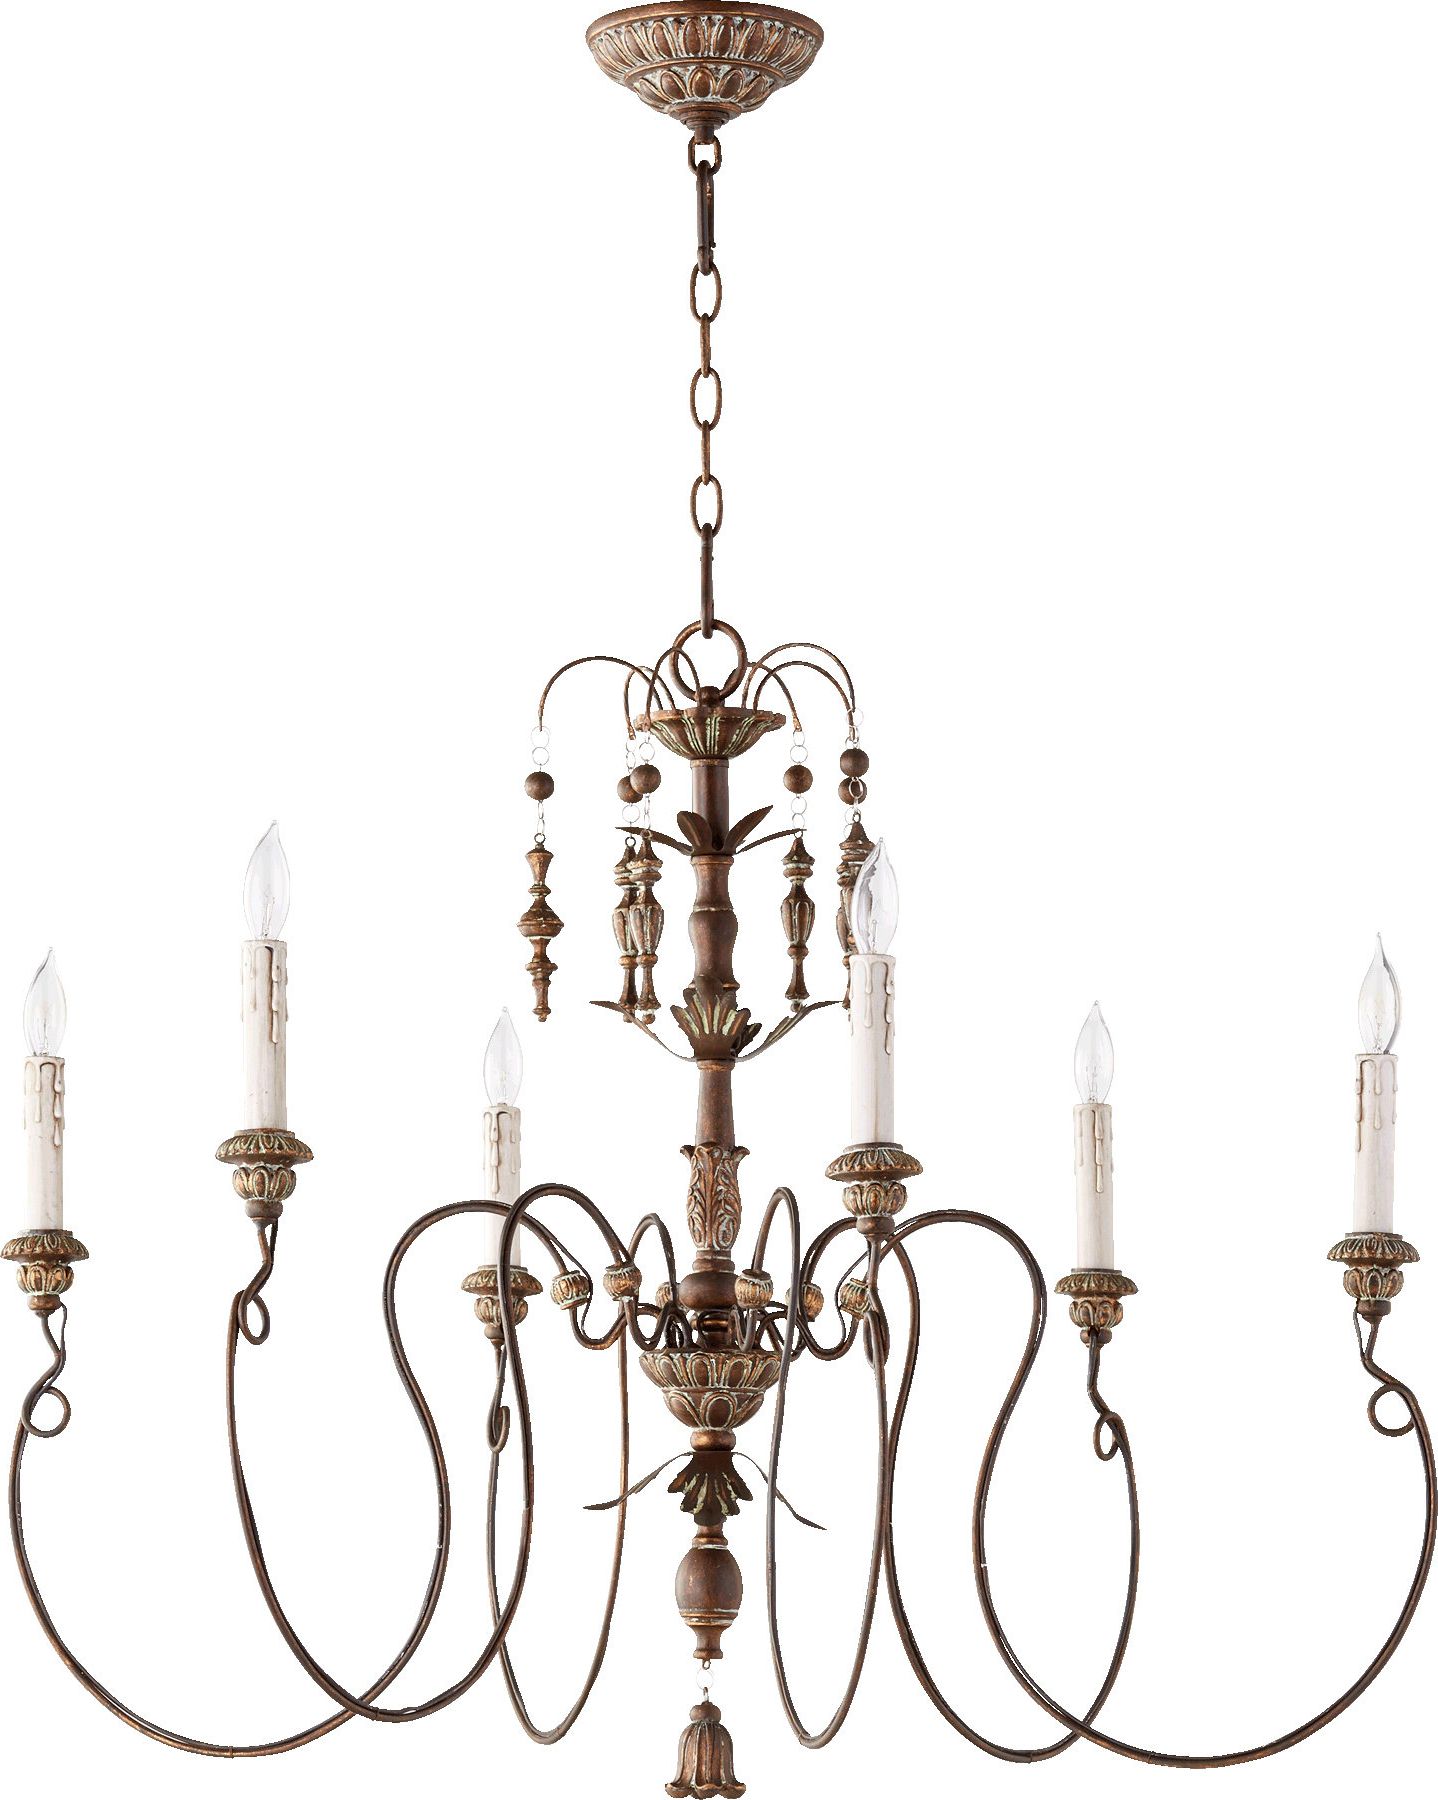 Paladino 6 Light Chandeliers For Preferred Paladino 6 Light Chandelier (View 3 of 25)